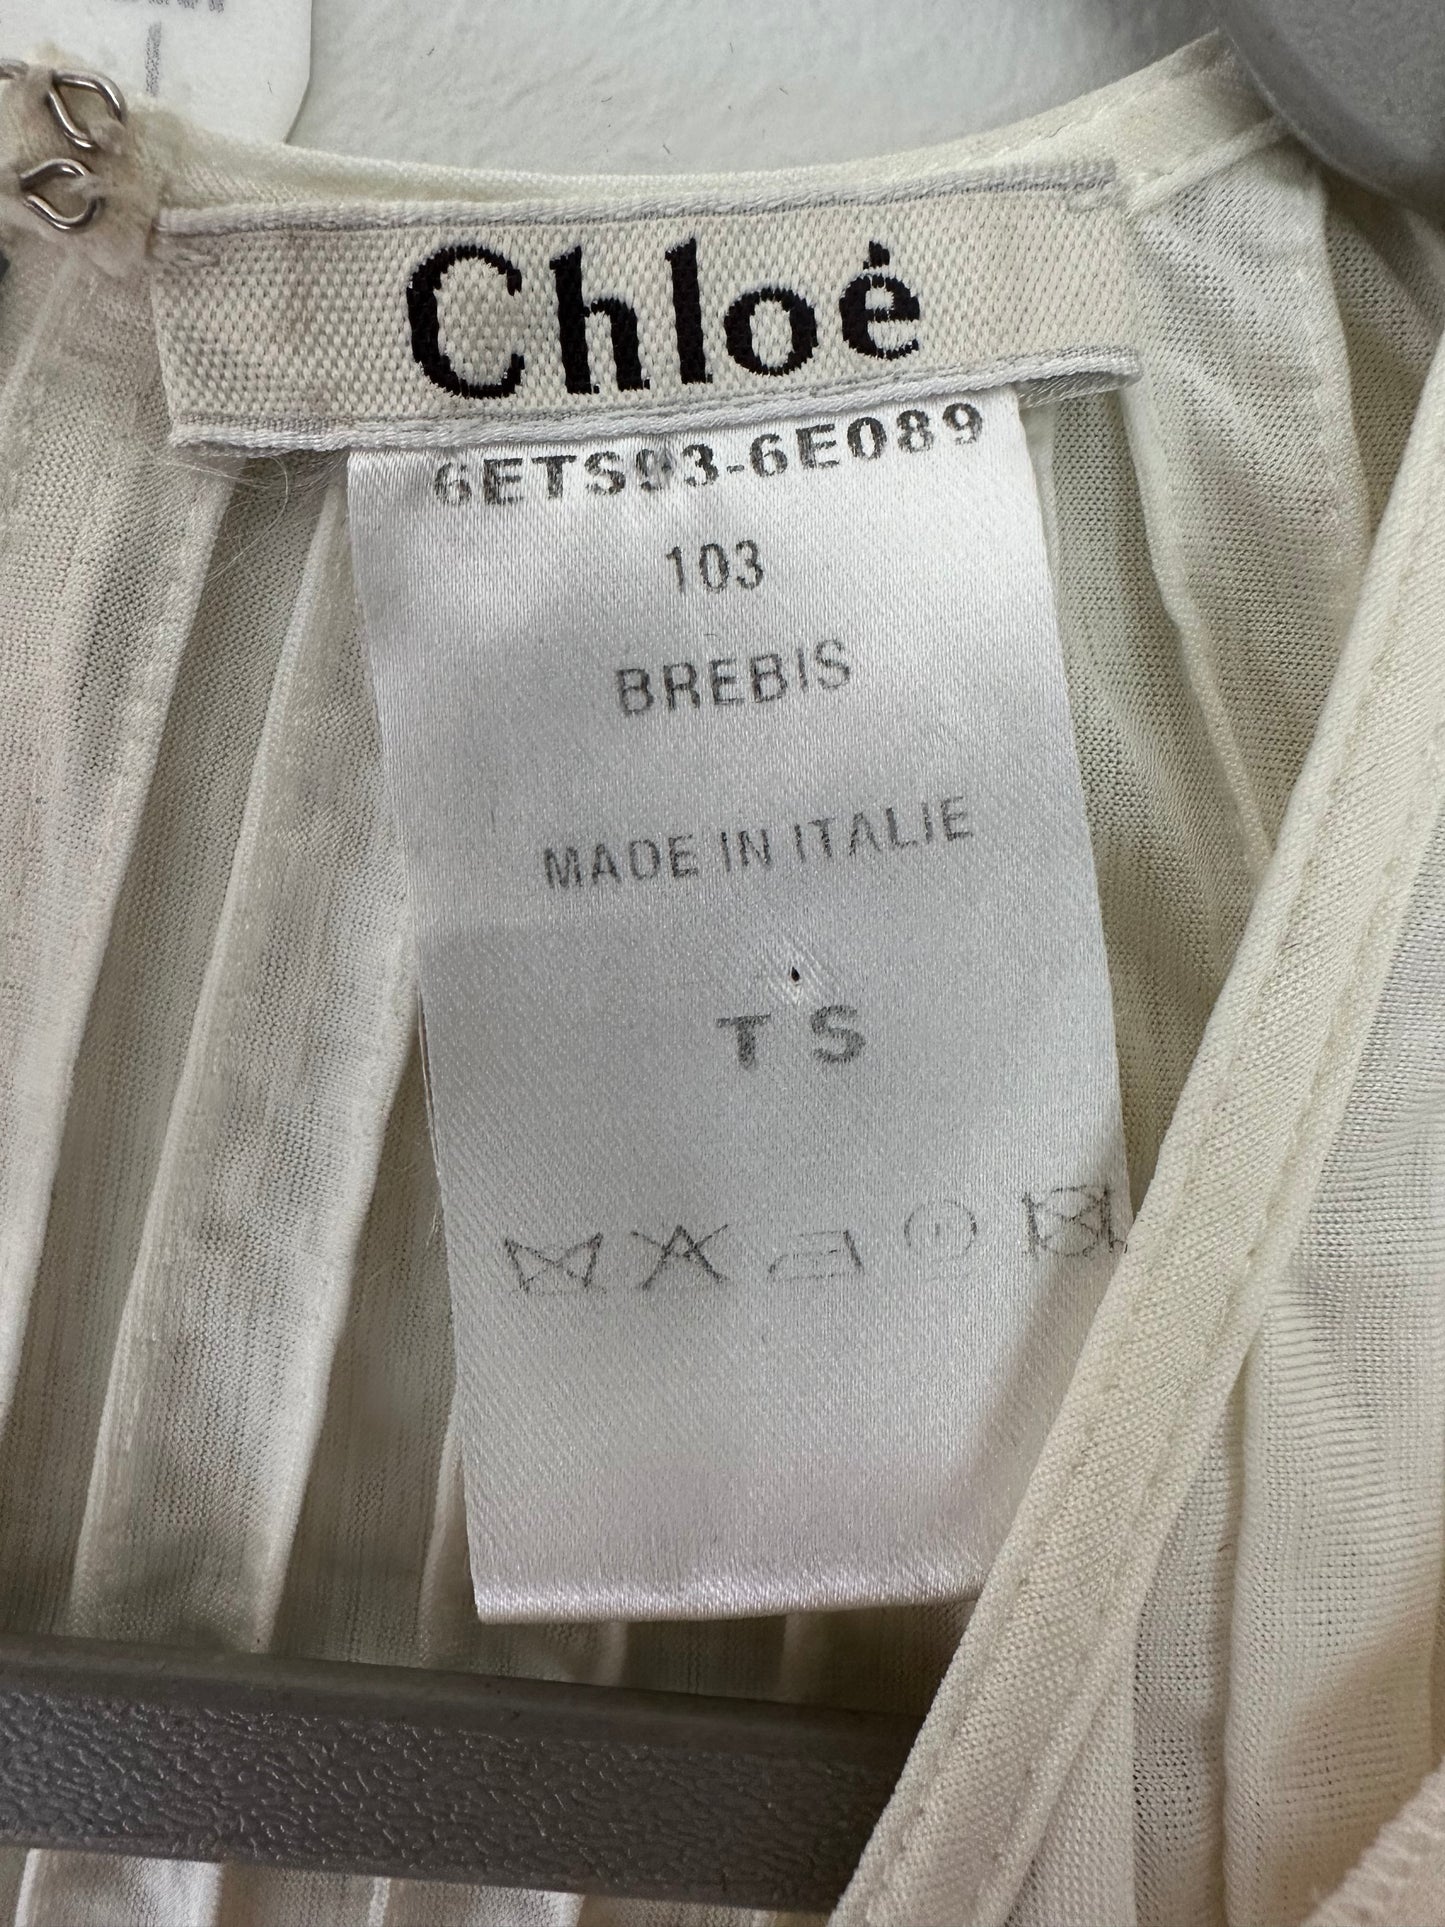 Chloé by Phoebe Philo 2006 Sleeveless Cream Blouse Size Small